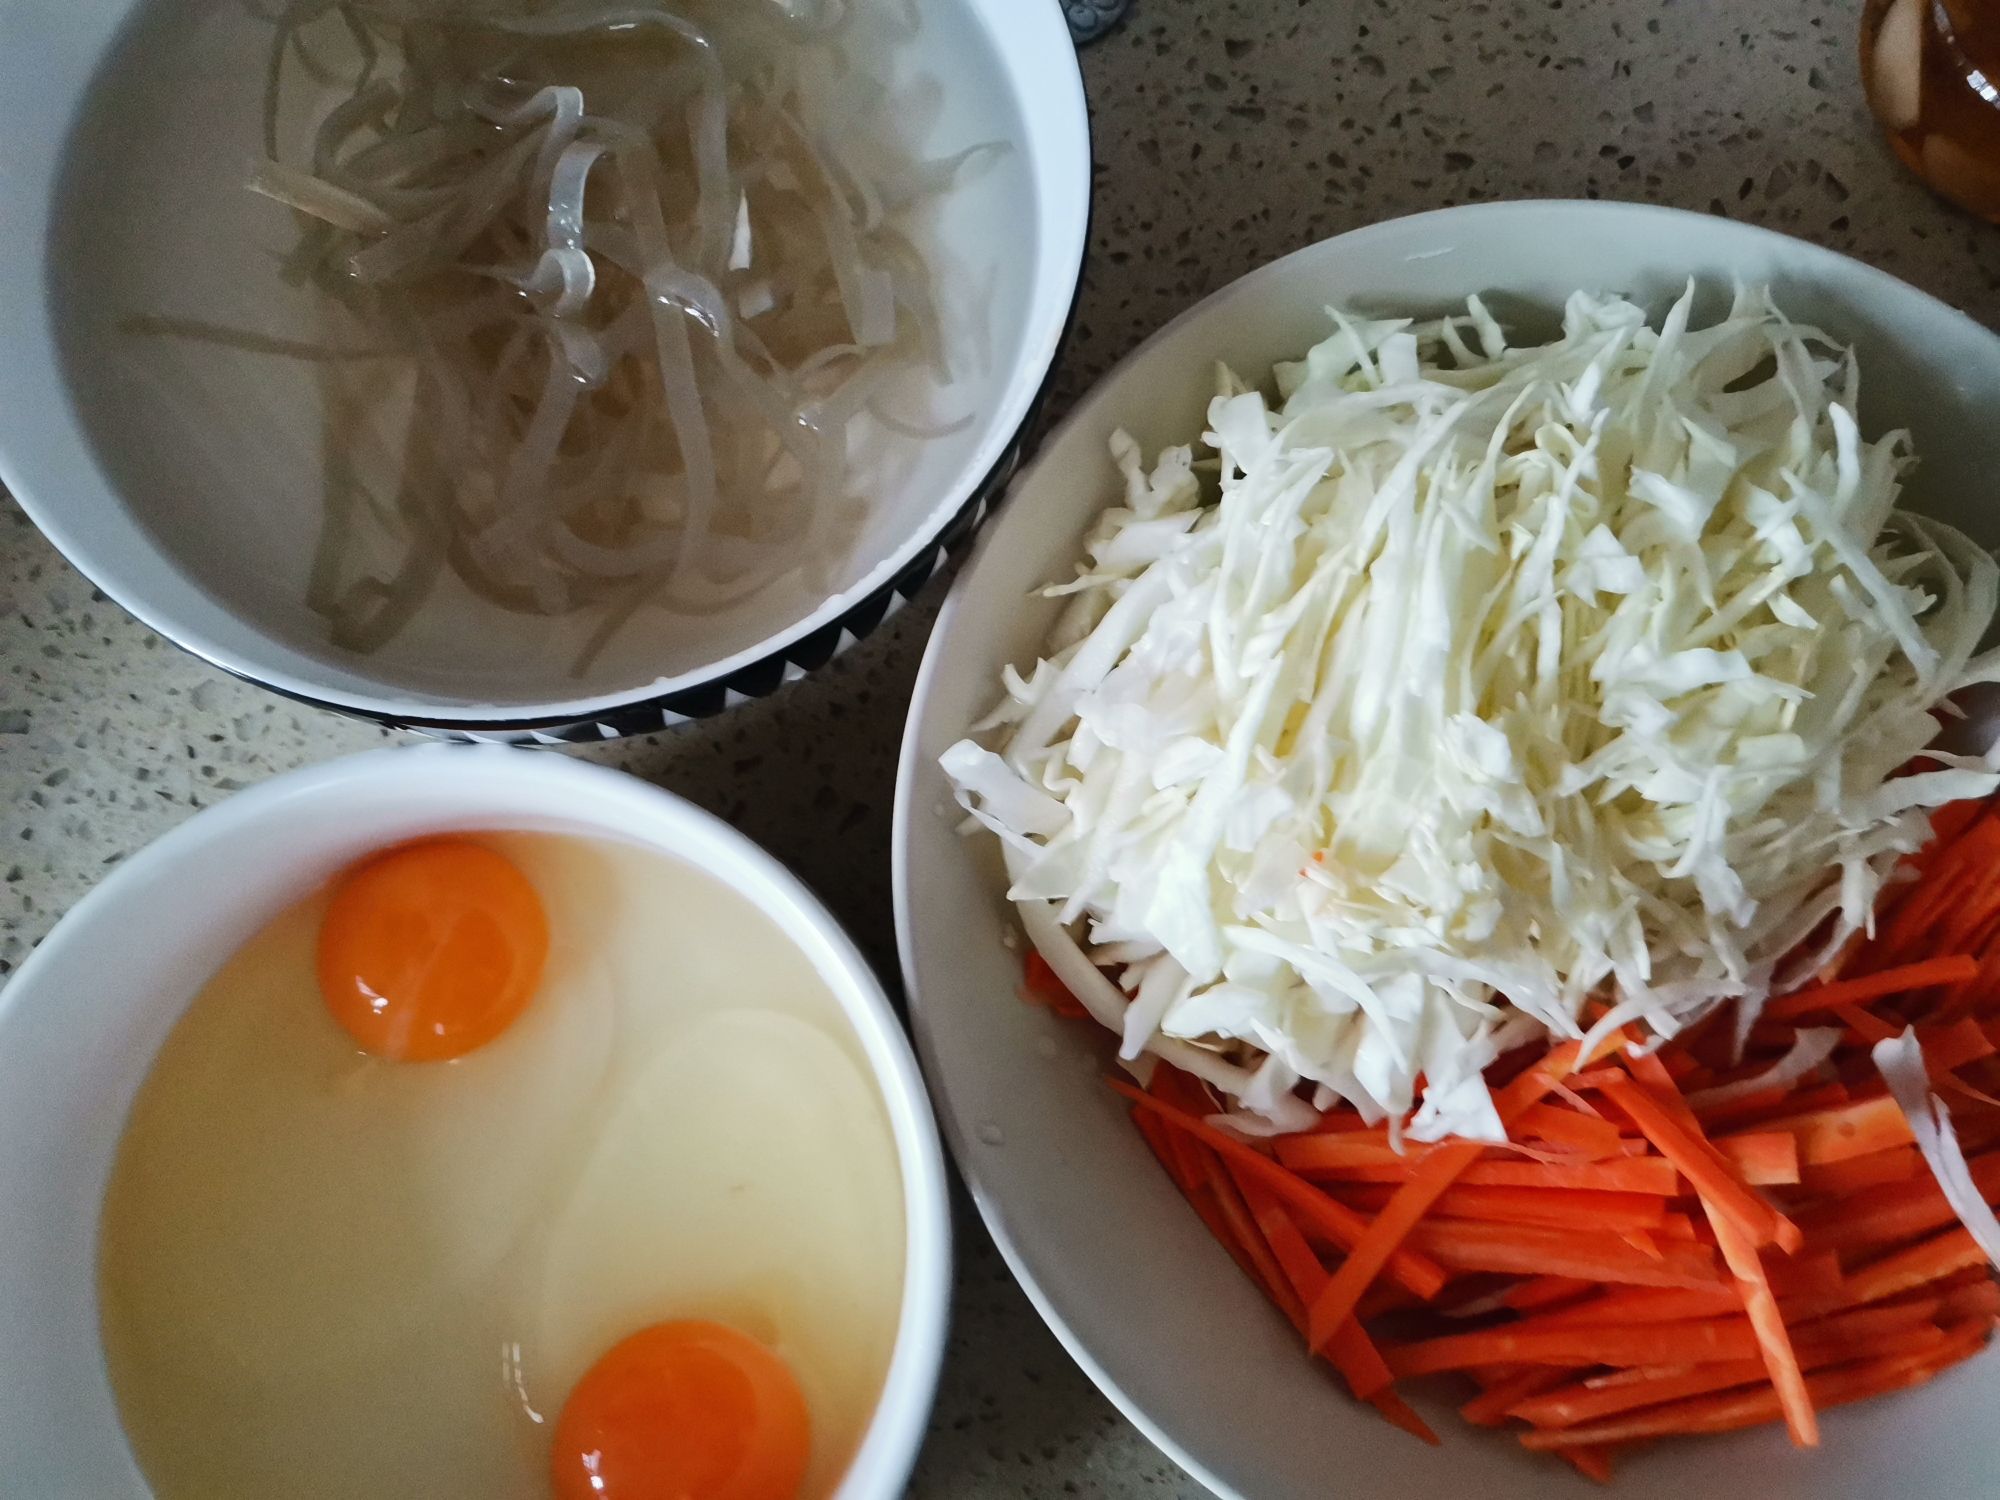 Scrambled Eggs with Cabbage and Vermicelli recipe